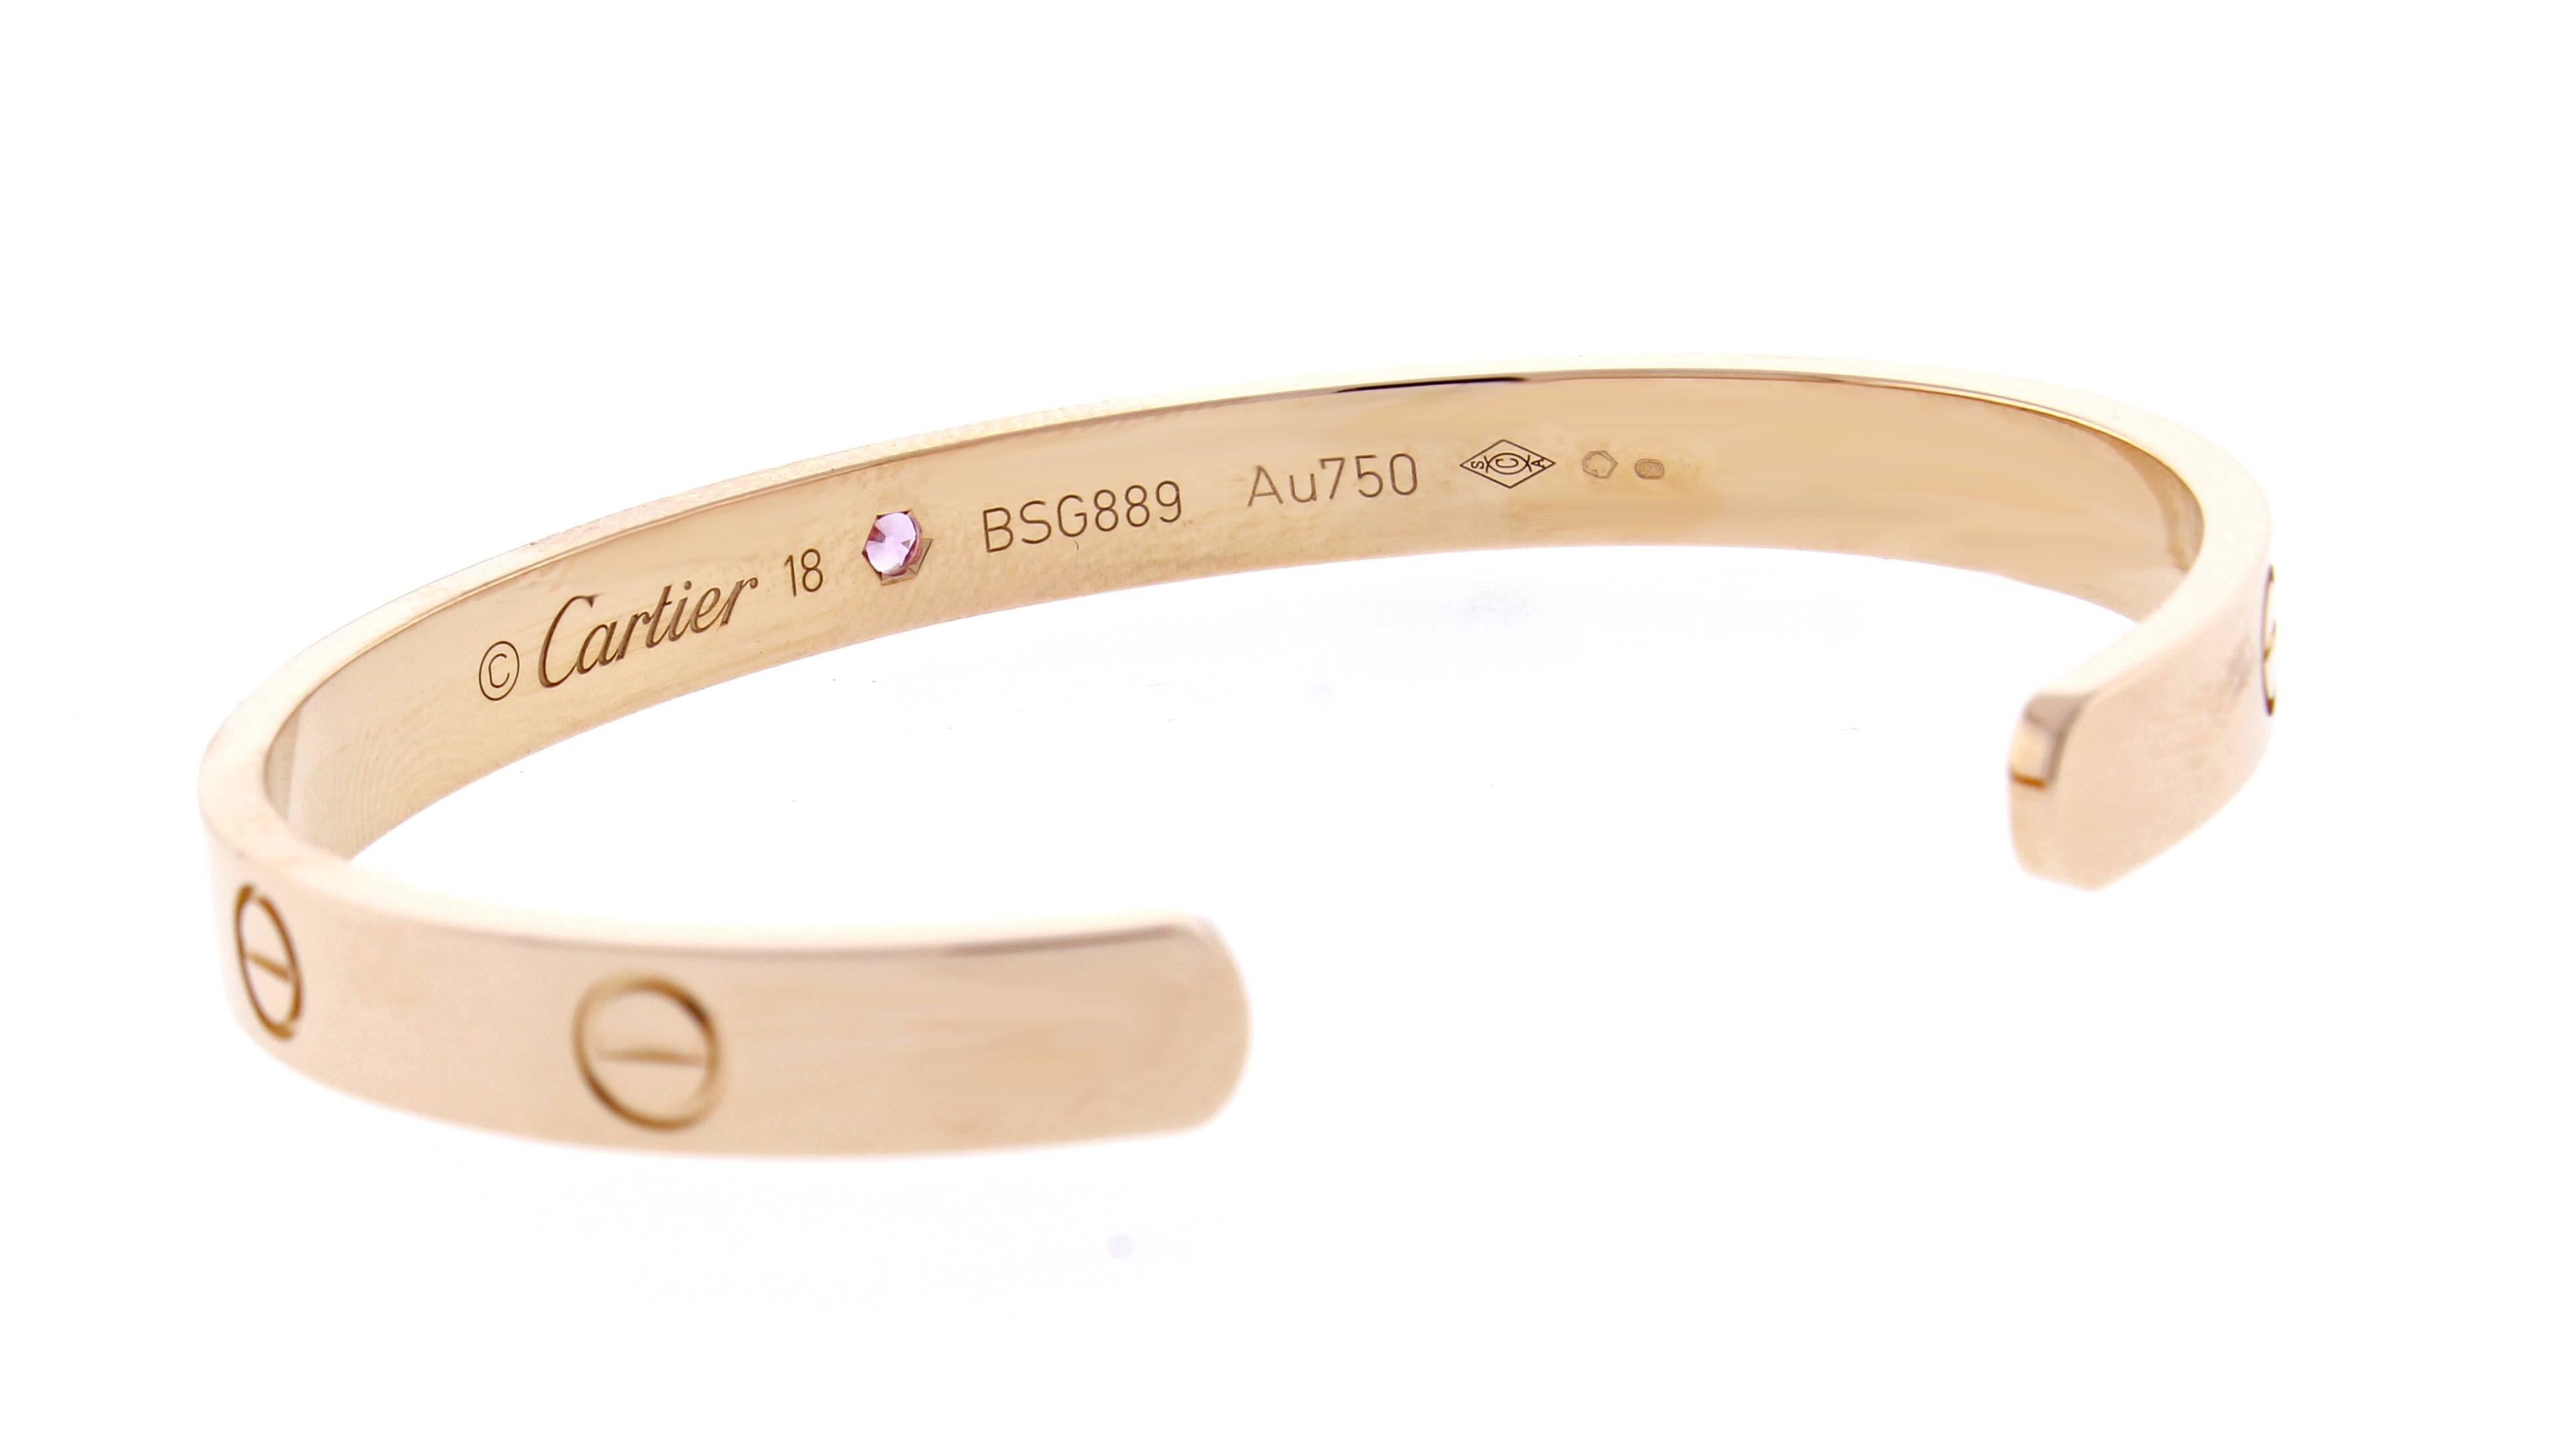 18 karat pink gold Cartier Love cuff bracelet set with a single pink sapphire.  The love bracelet remains an iconic symbol of love that transcends convention. Size 18, 